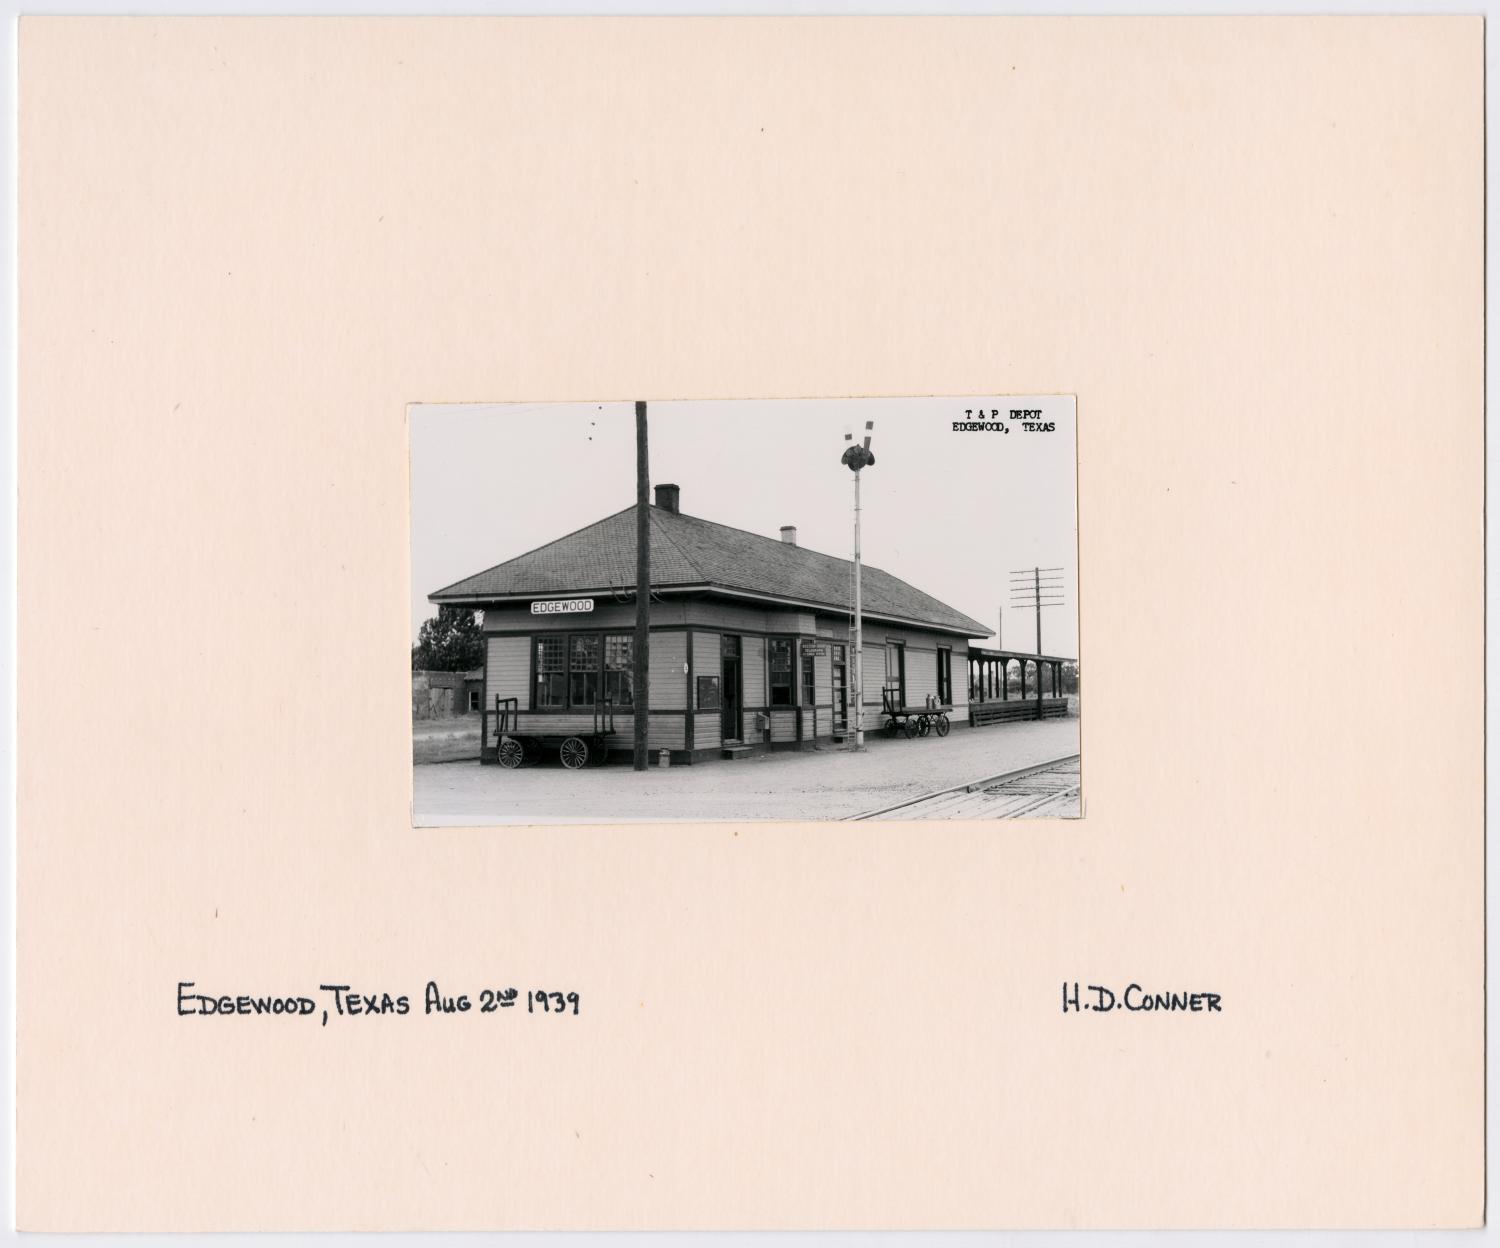 Images of Texas & Pacific Stations and Structures in  Edgewood, TX